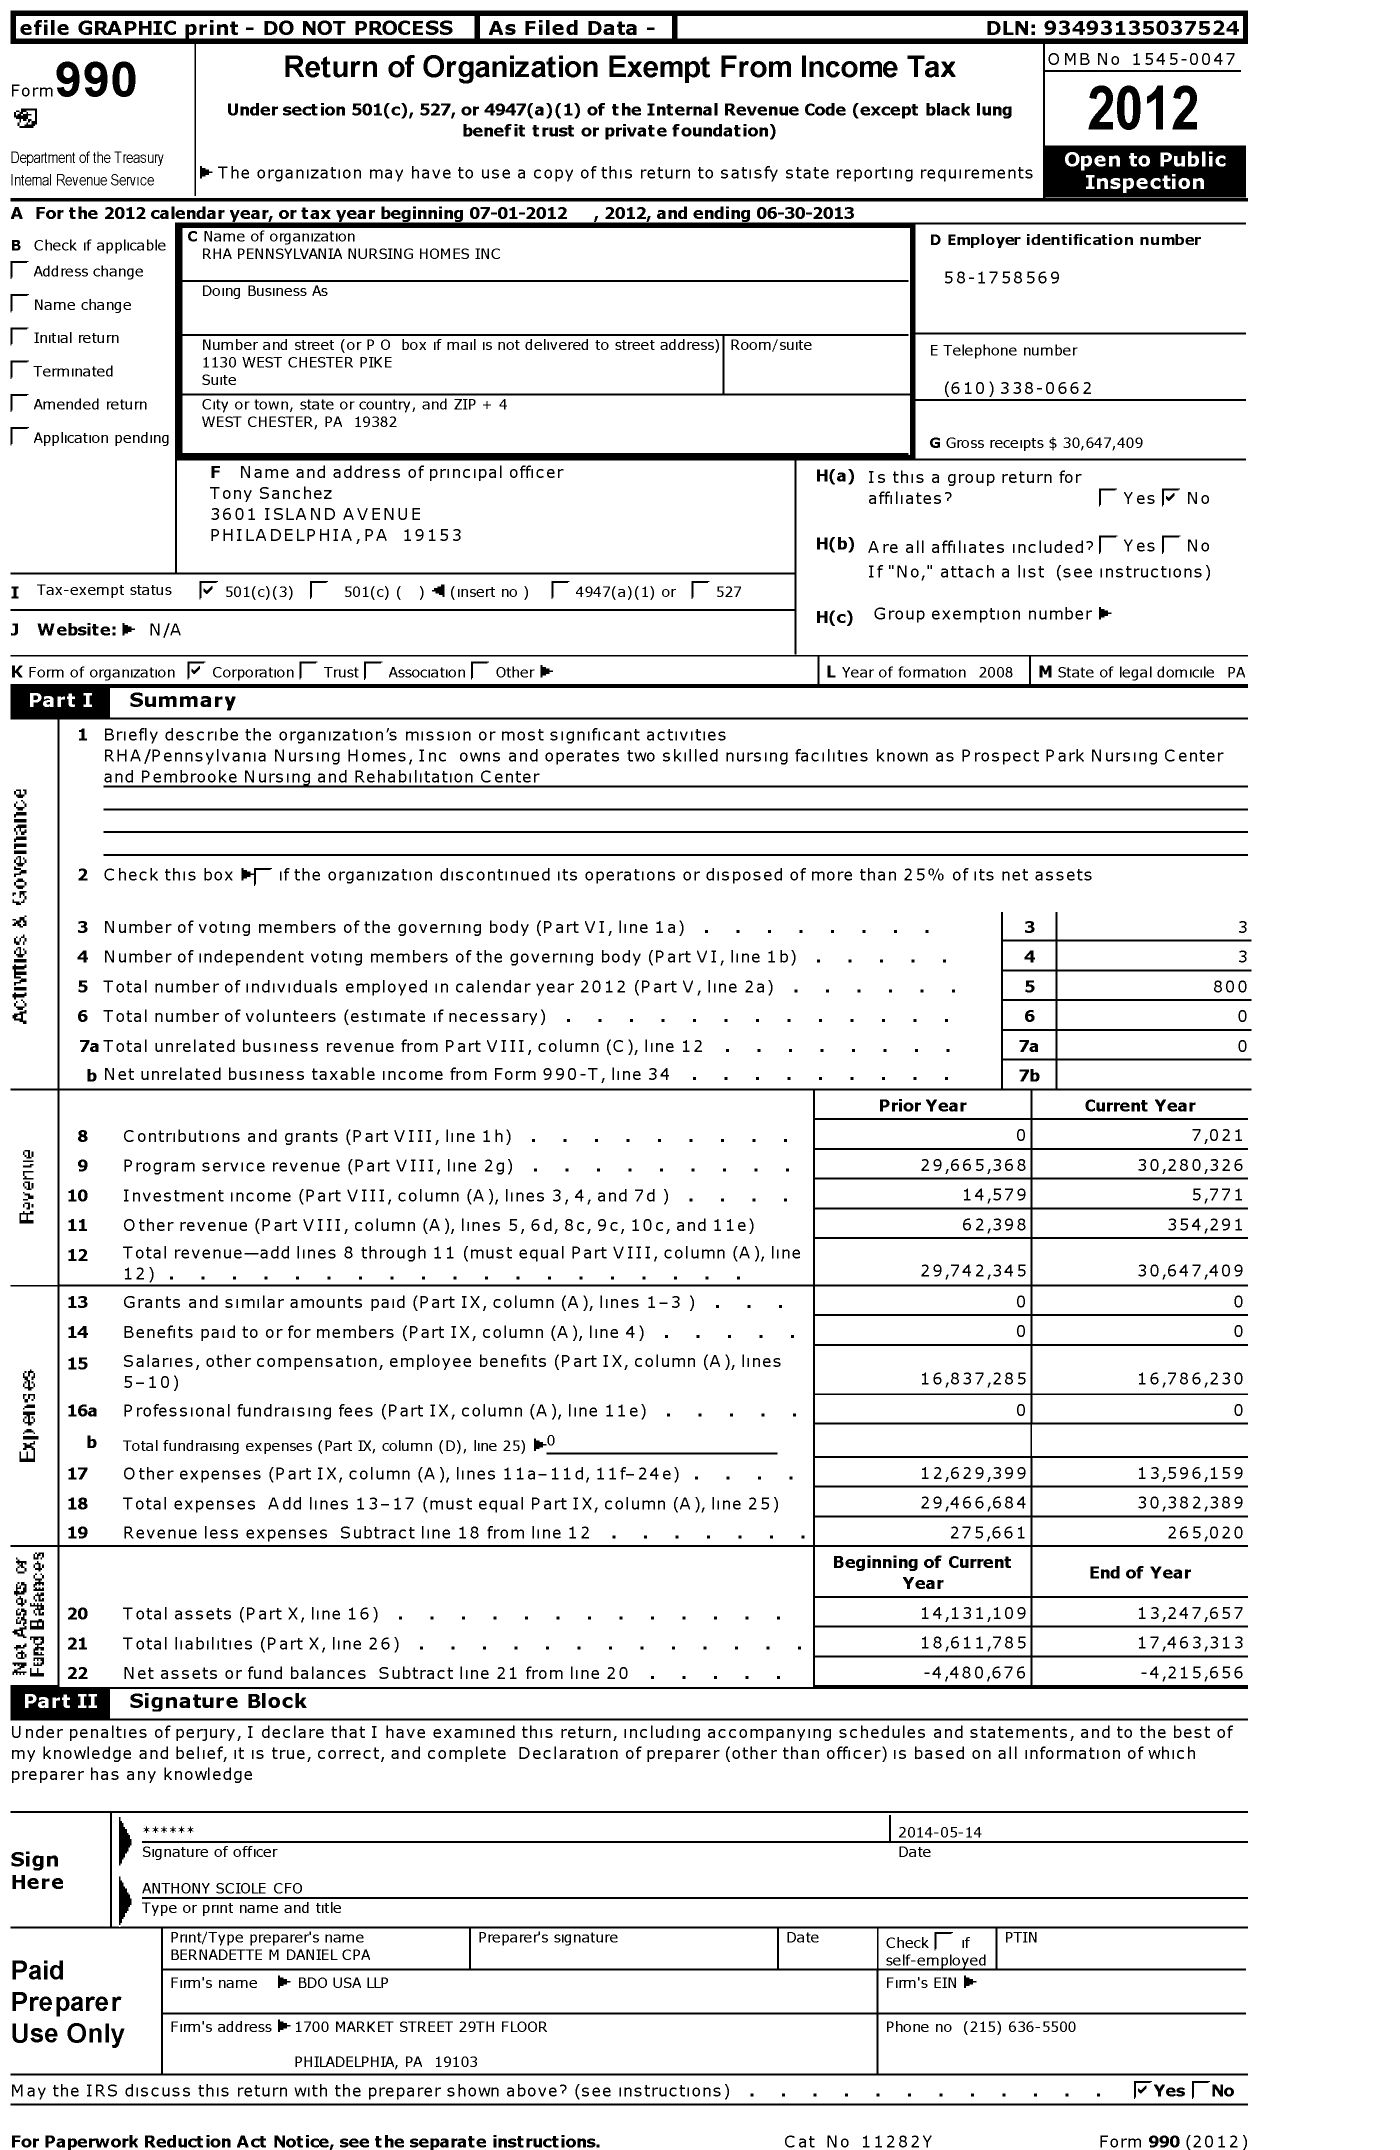 Image of first page of 2012 Form 990 for Rha Pennsylvania Nursing Homes